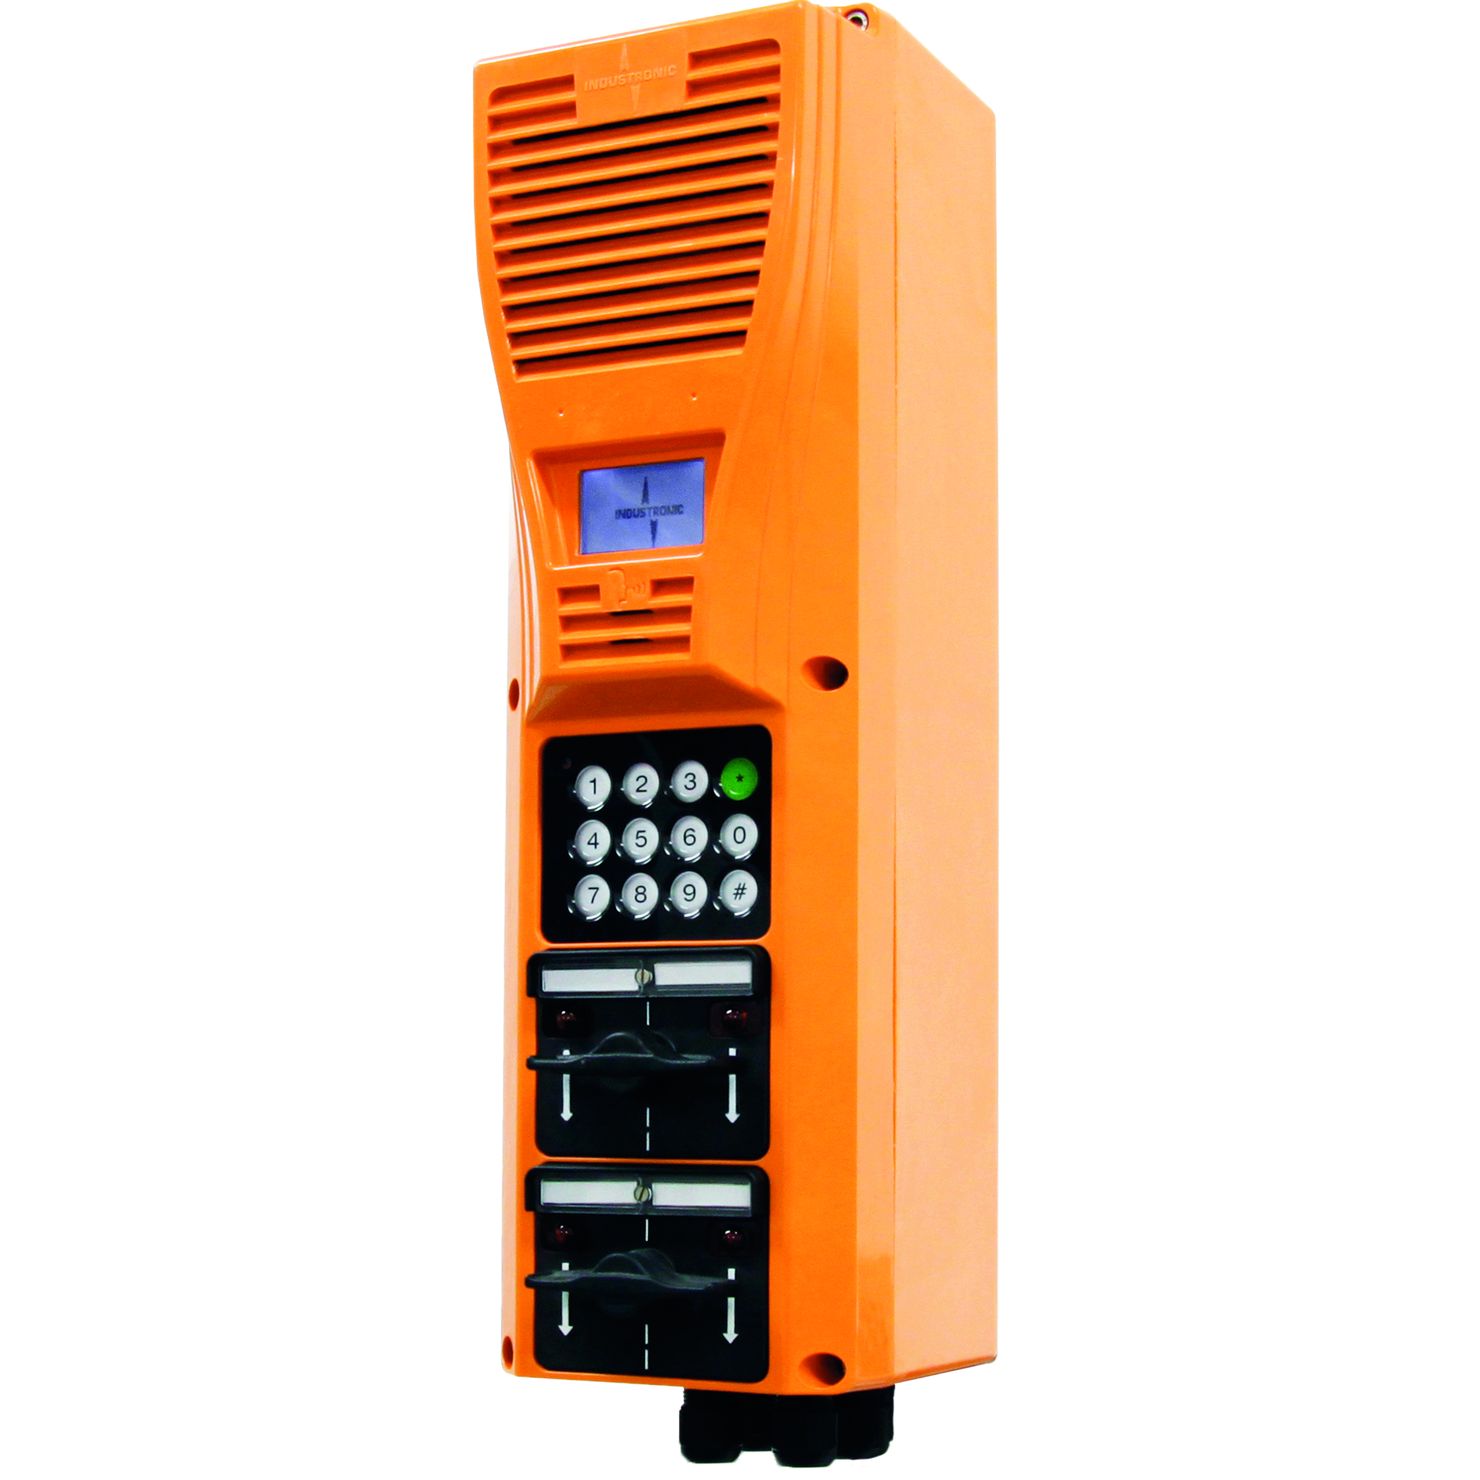 The weather-proof IP outdoor (harsh environment) intercom stations of the NRO xx2/D series with integrated dial keypad are part of the INTRON-D plus communication and public address system from INDUSTRONIC.